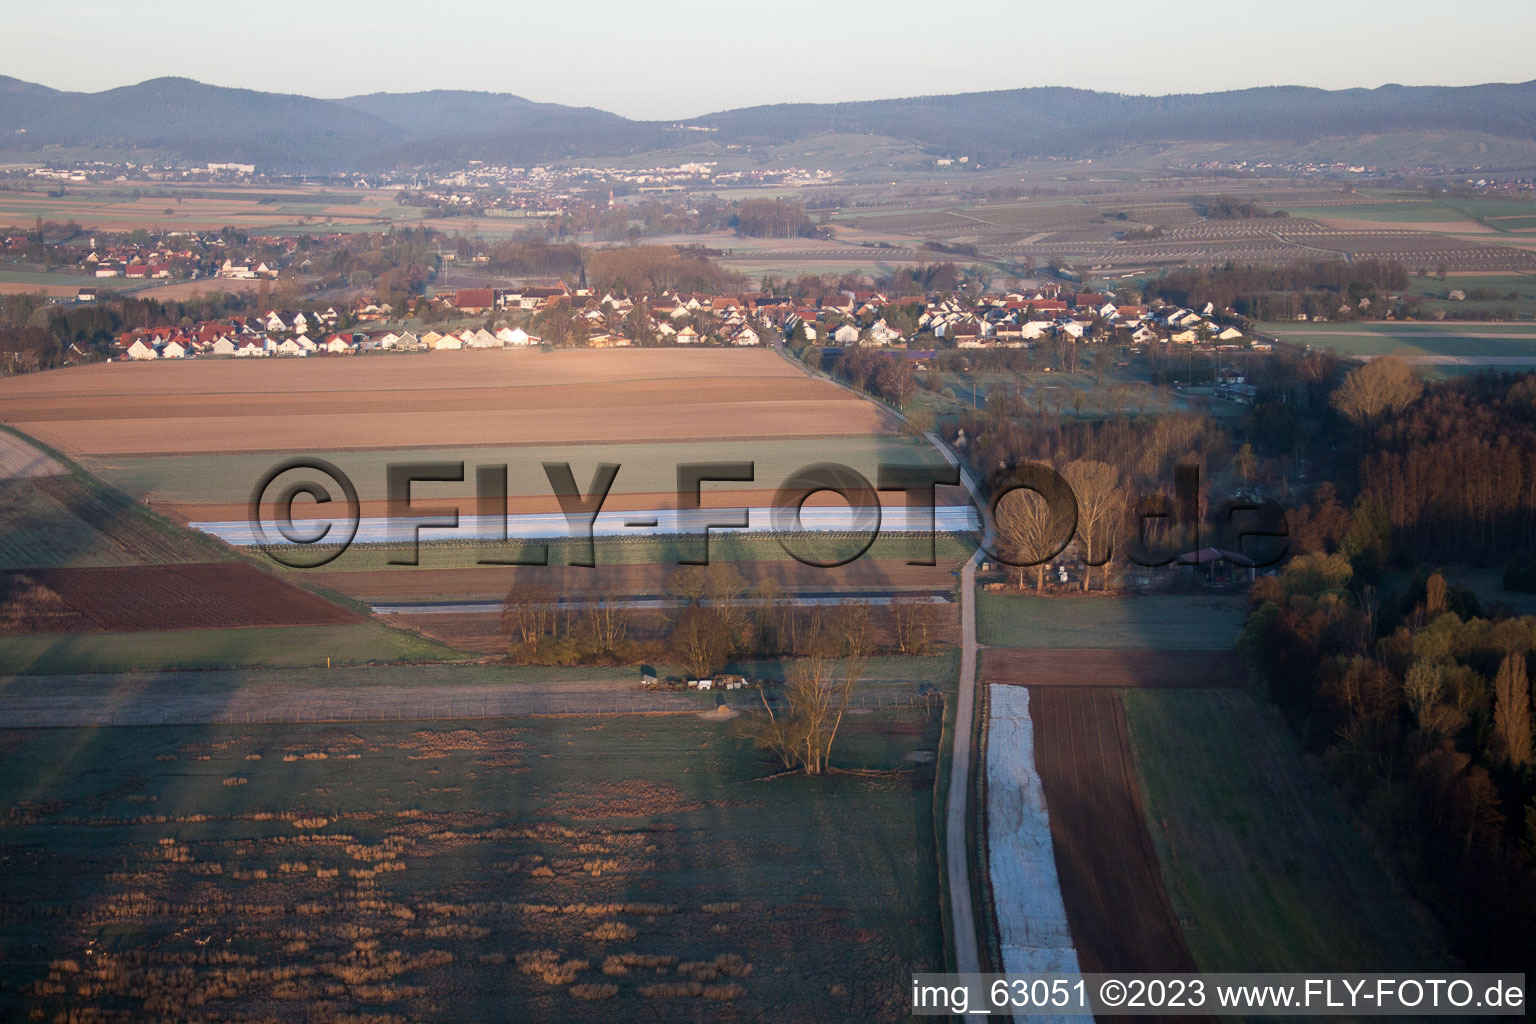 Barbelroth in the state Rhineland-Palatinate, Germany from above